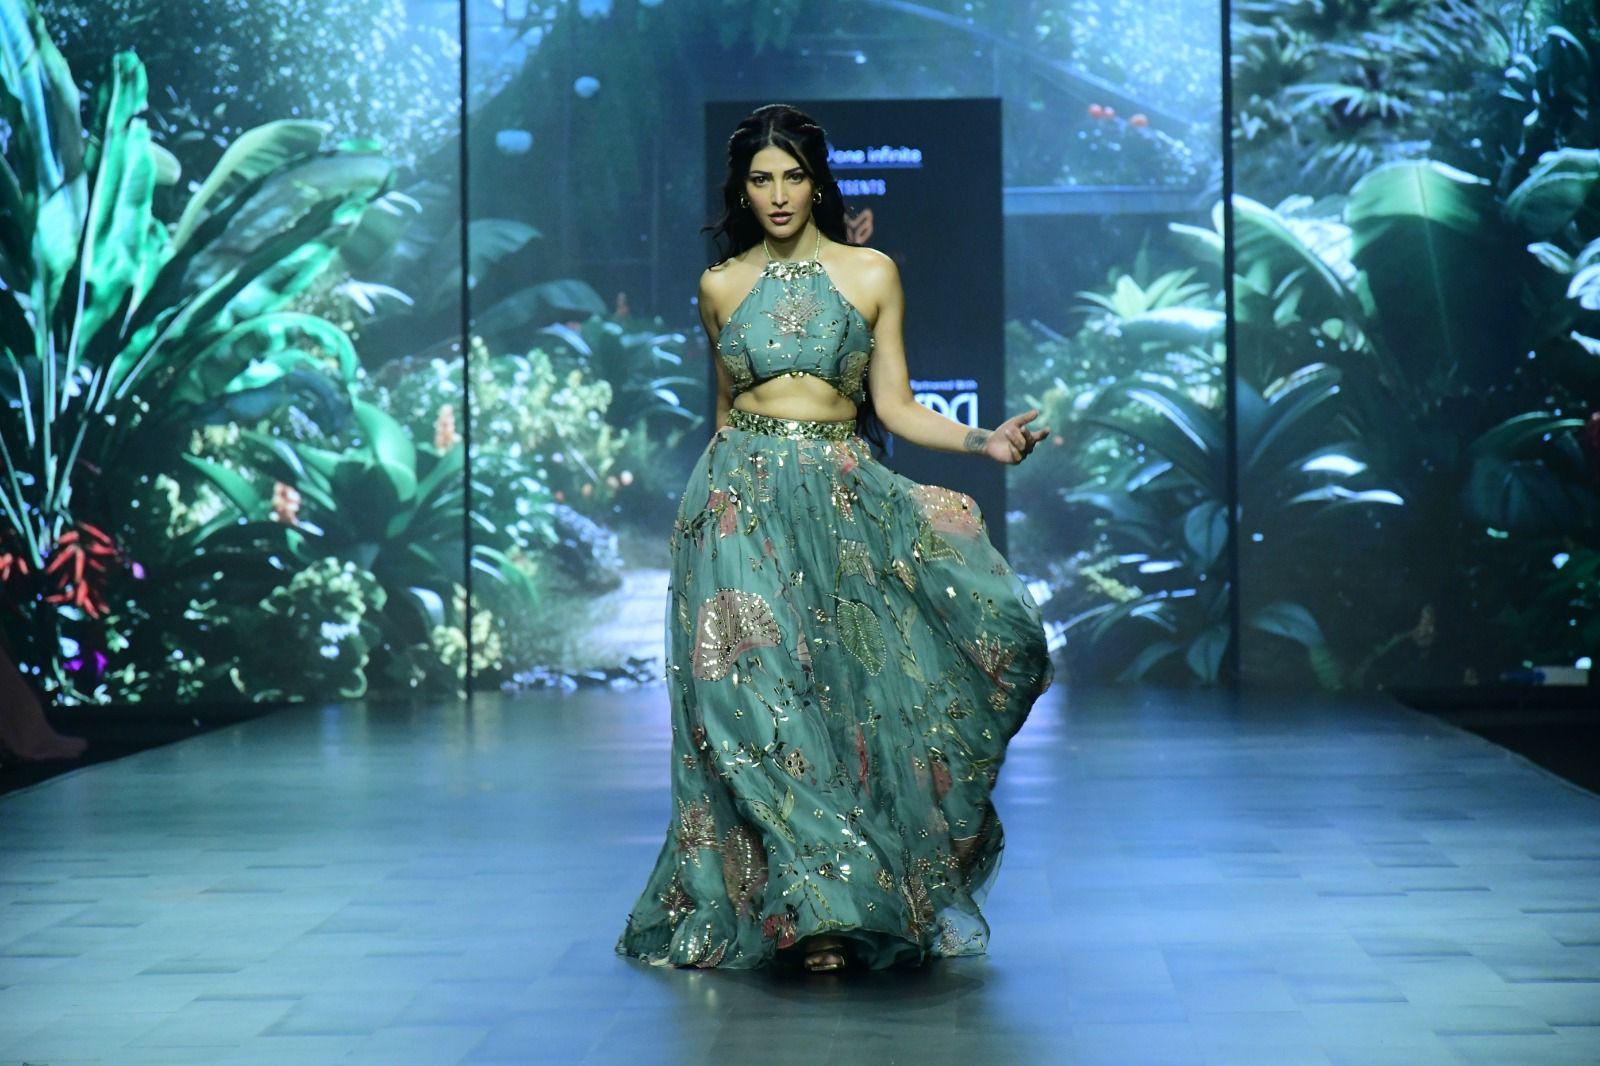 Shruti Haasan looked absolutely gorgeous in a light grey lehenga adorned with intricate floral threadwork